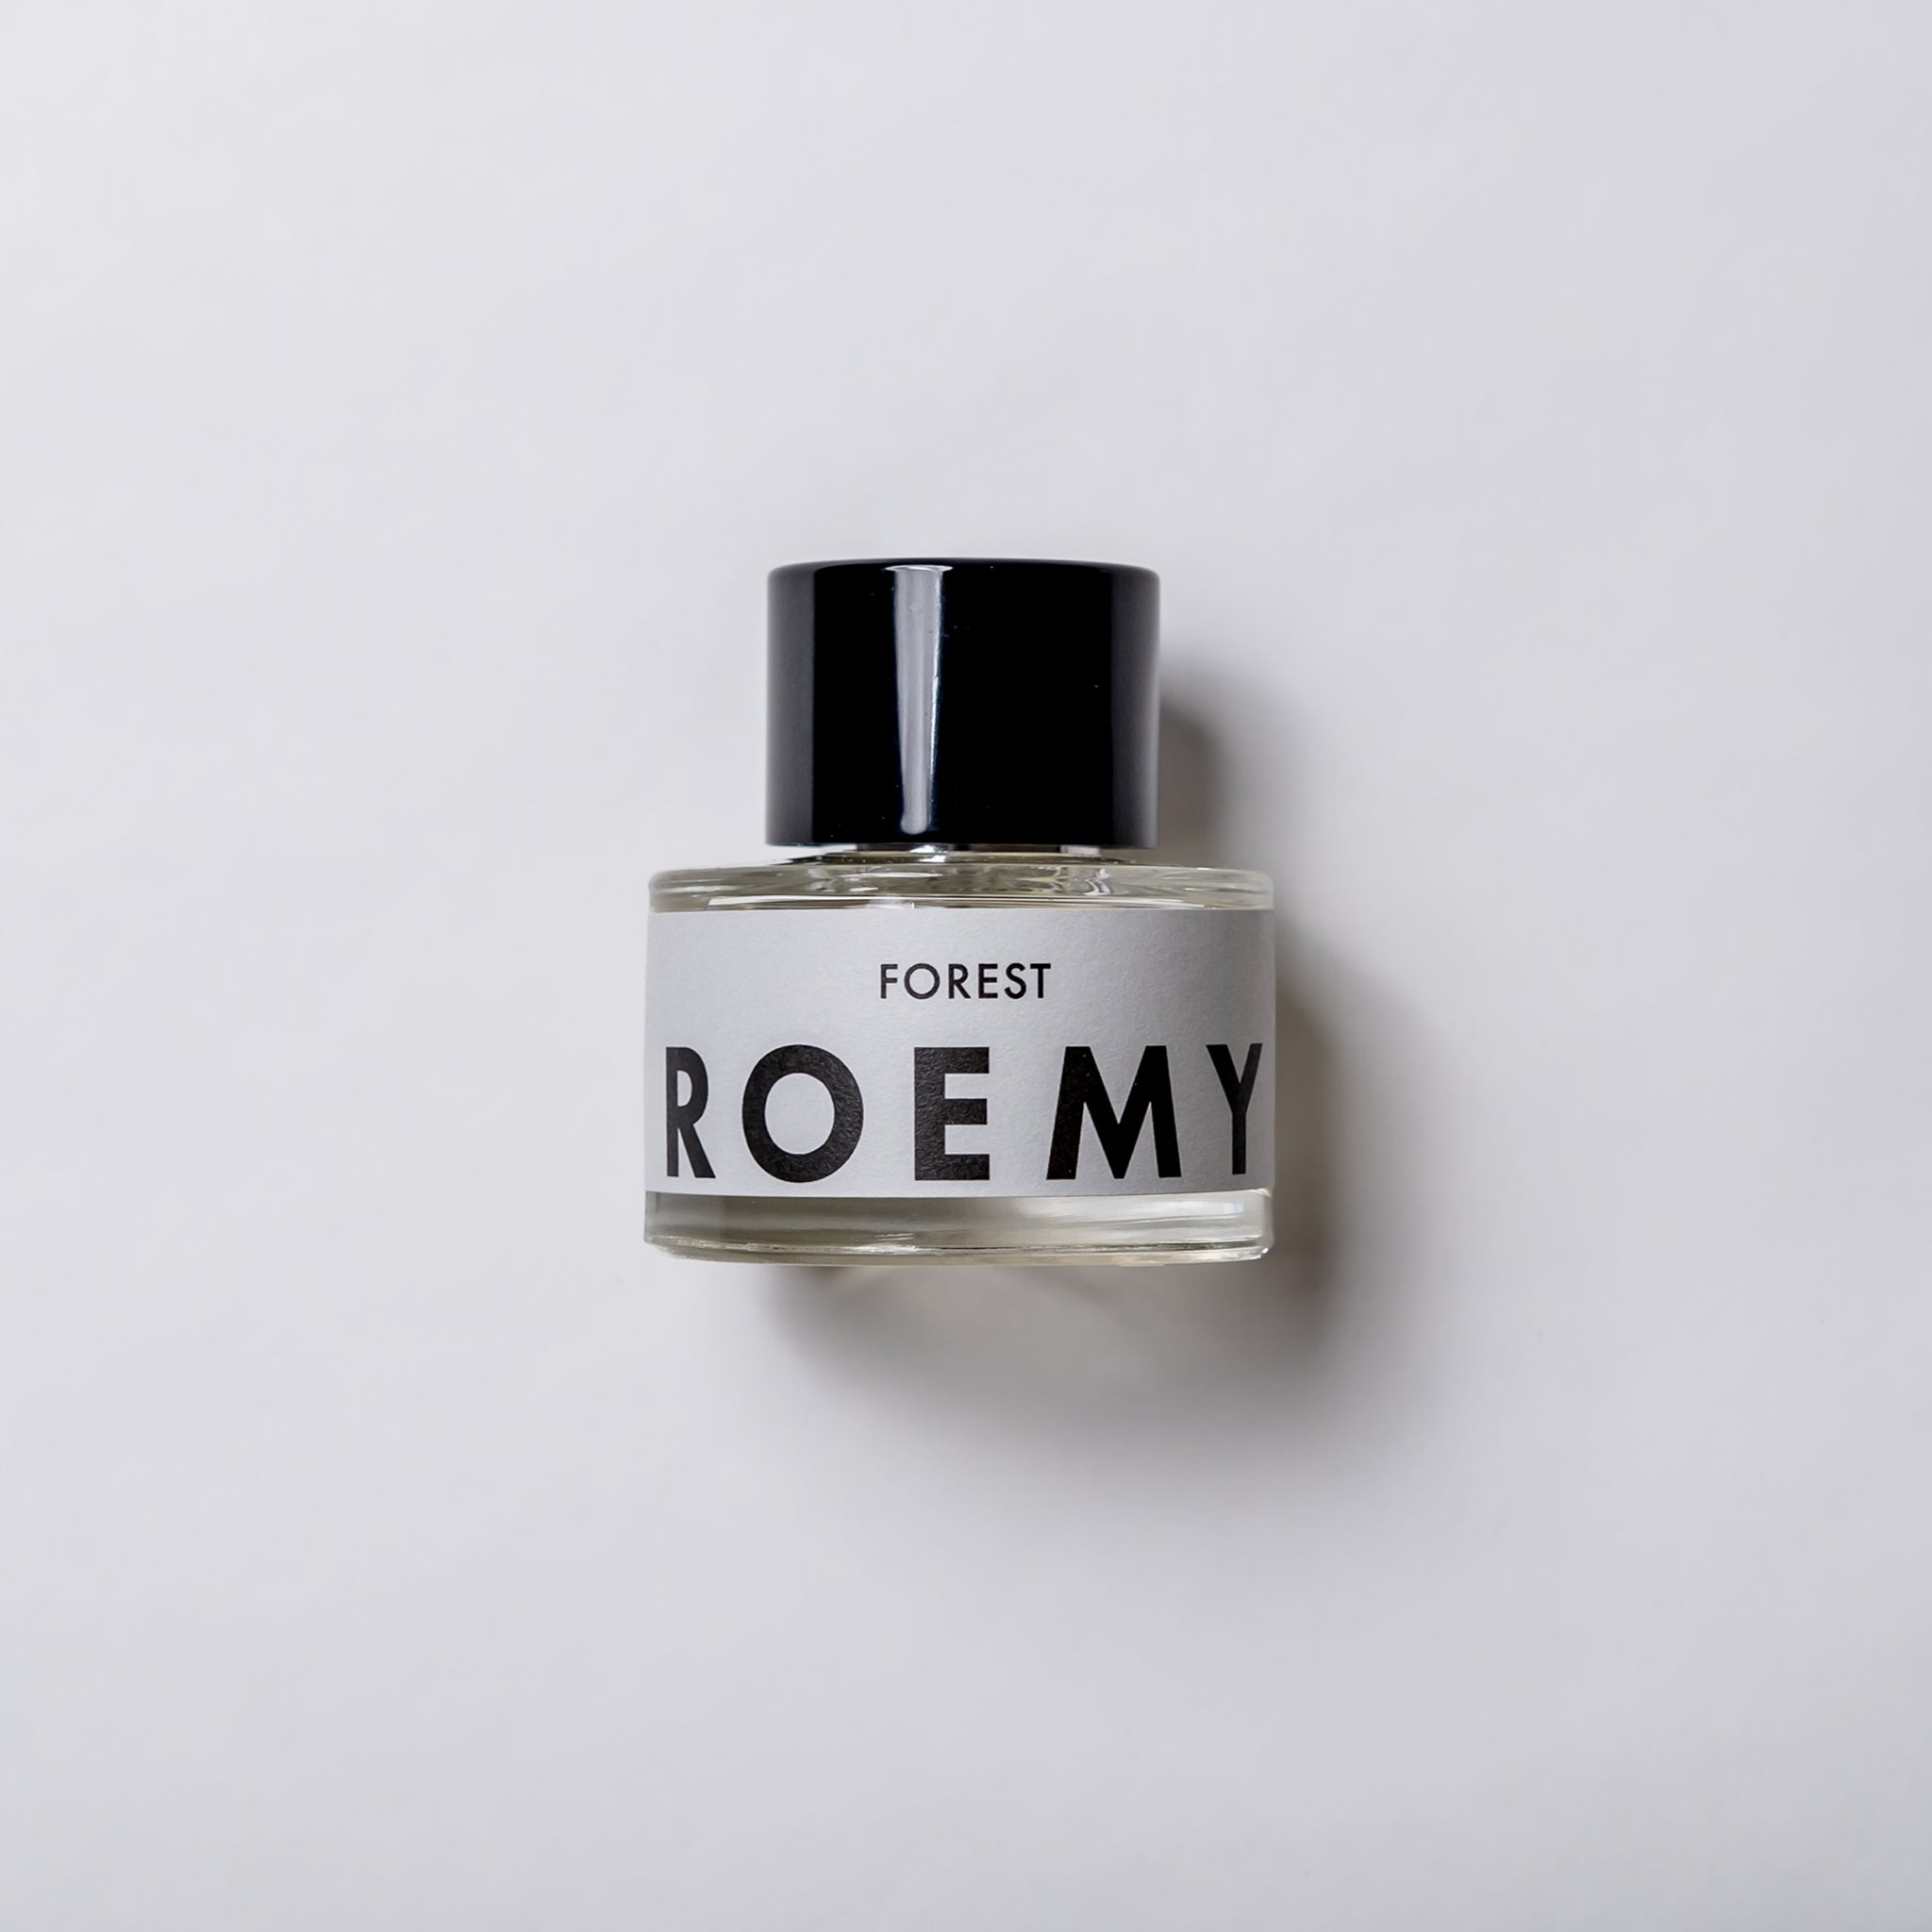 ROEMY Forest 55mL Parfum - top down